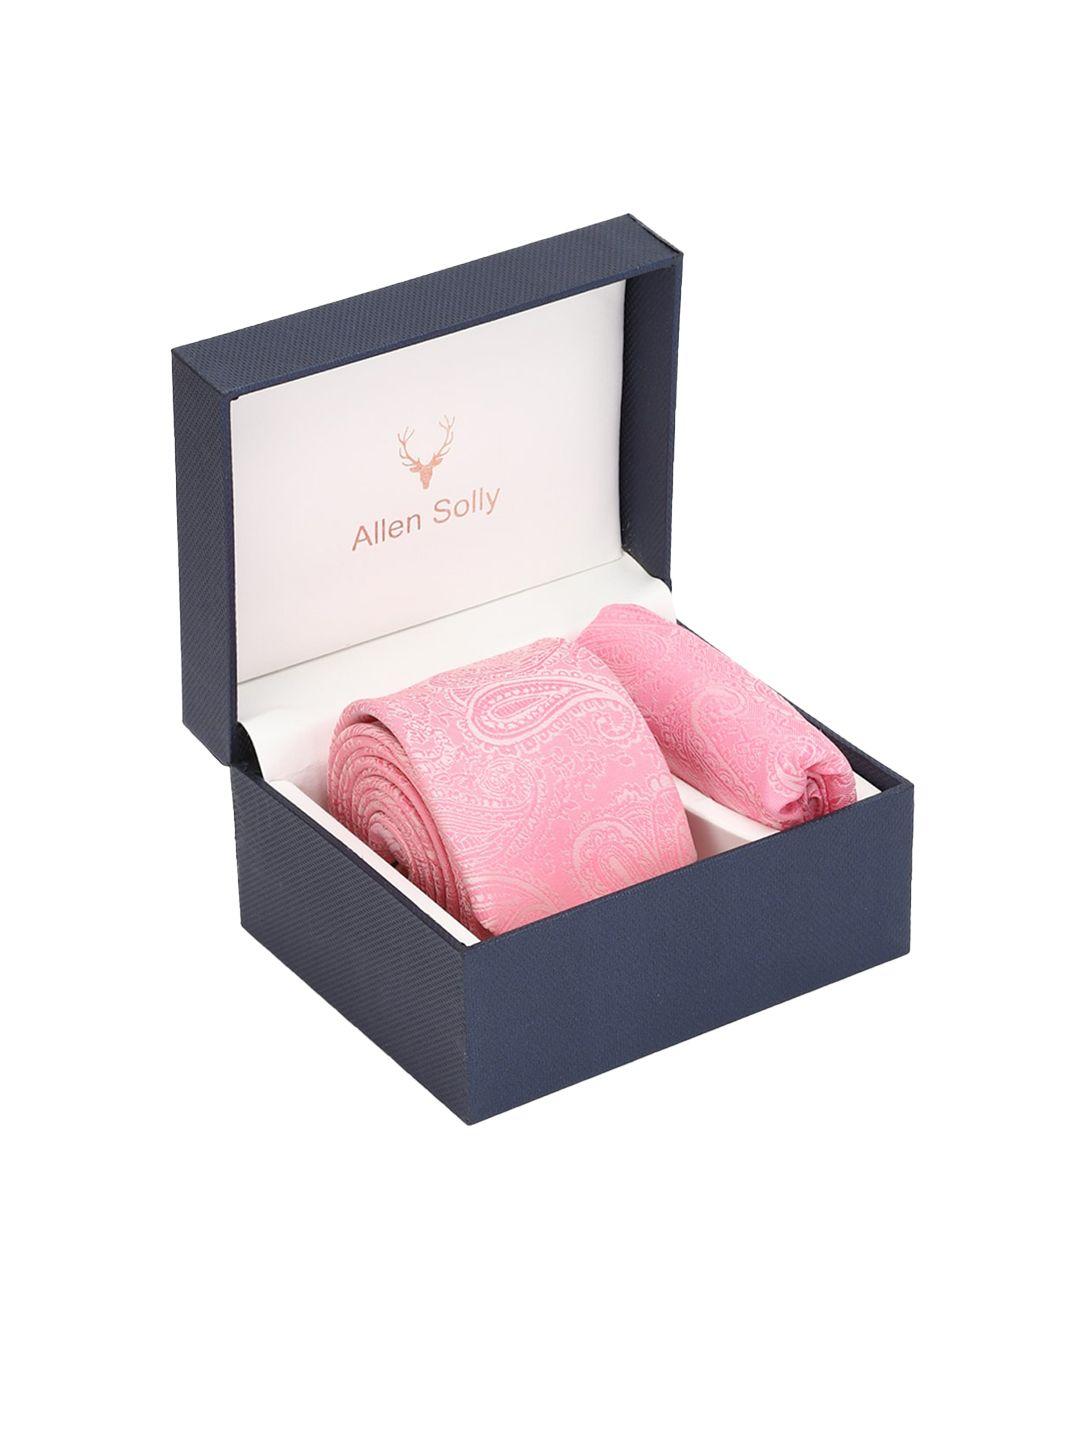 allen-solly-men-pink-printed-tie-and-pocket-square-accessory-gift-set